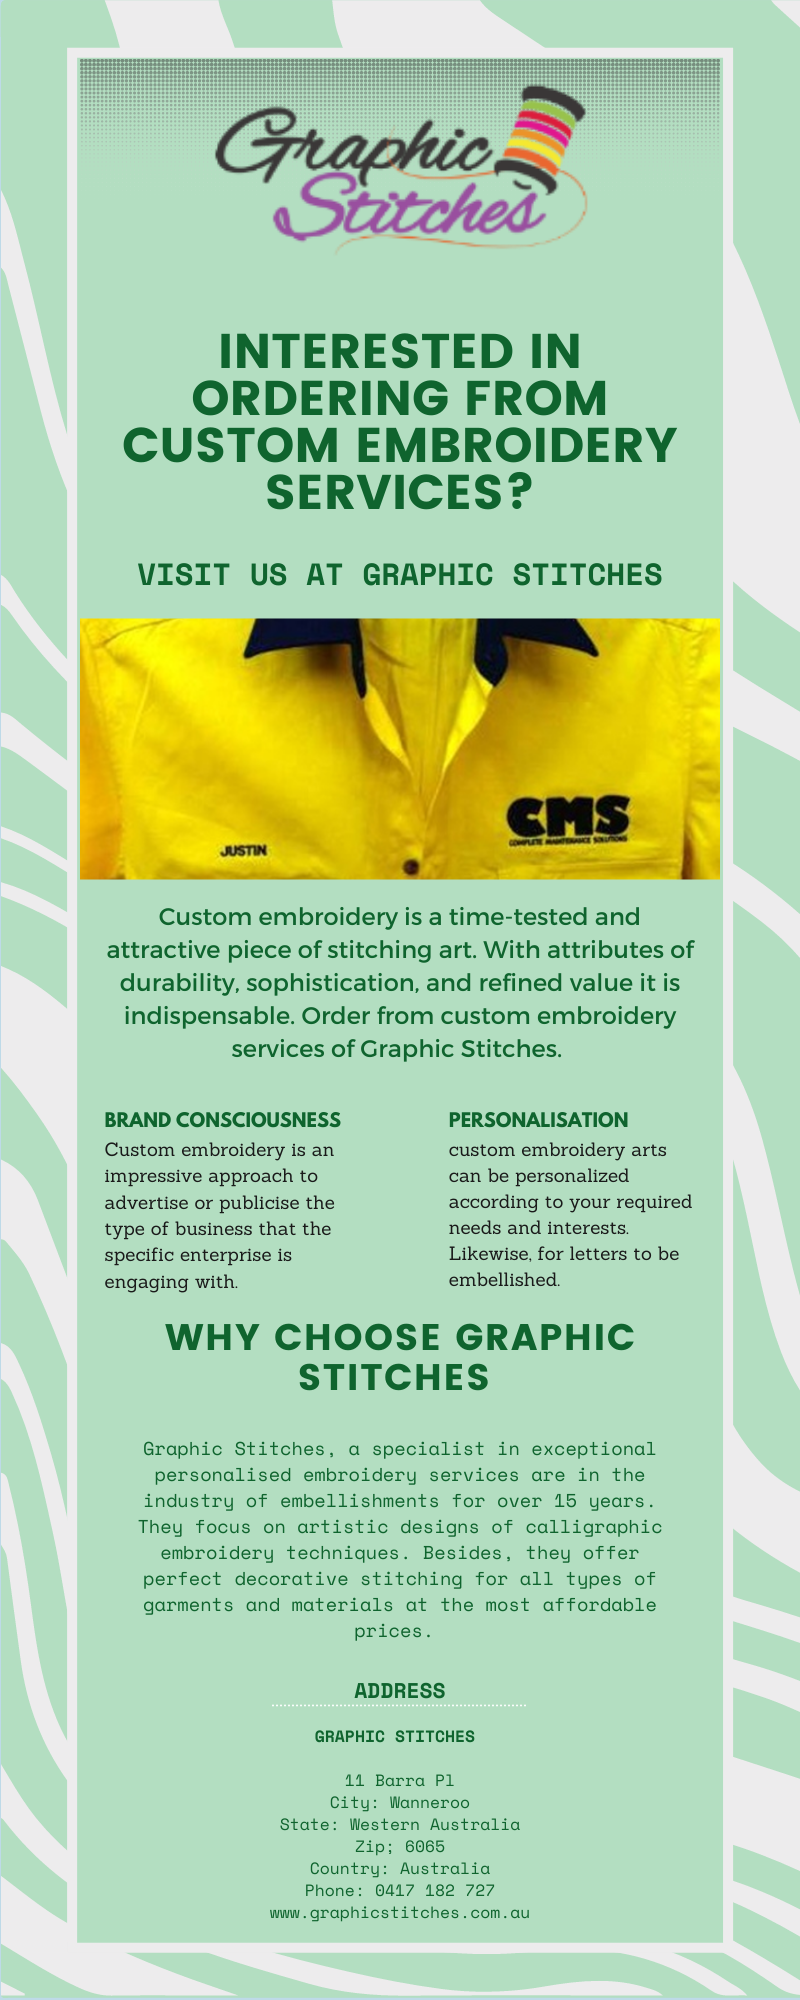 Interested in ordering from custom embroidery services Visit us at Graphic Stitches.png Please visit:  https://writeupcafe.com/community/interested-in-ordering-from-custom-embroidery-services-visit-us-at-graphic-stitches/?snax_post_submission=success

 by Graphicstitch